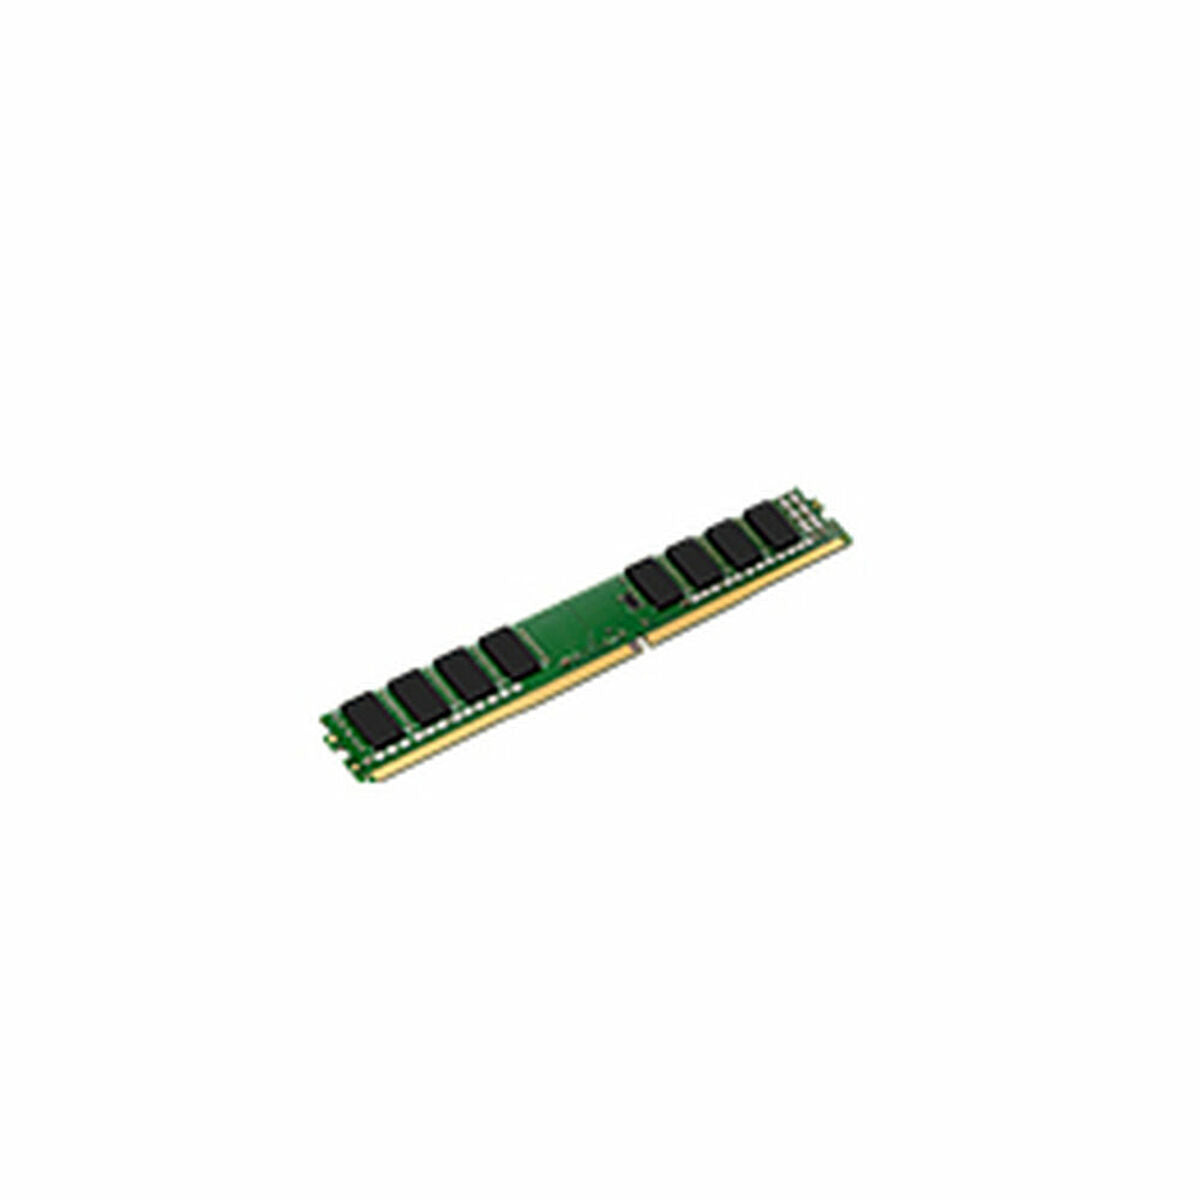 RAM Memory Kingston KVR26N19S8L/8 DDR4 8 GB, Kingston, Computing, Components, ram-memory-kingston-kvr26n19s8l-8-ddr4-8-gb, Brand_Kingston, category-reference-2609, category-reference-2803, category-reference-2807, category-reference-t-19685, category-reference-t-19912, category-reference-t-21360, computers / components, Condition_NEW, Price_20 - 50, Teleworking, RiotNook